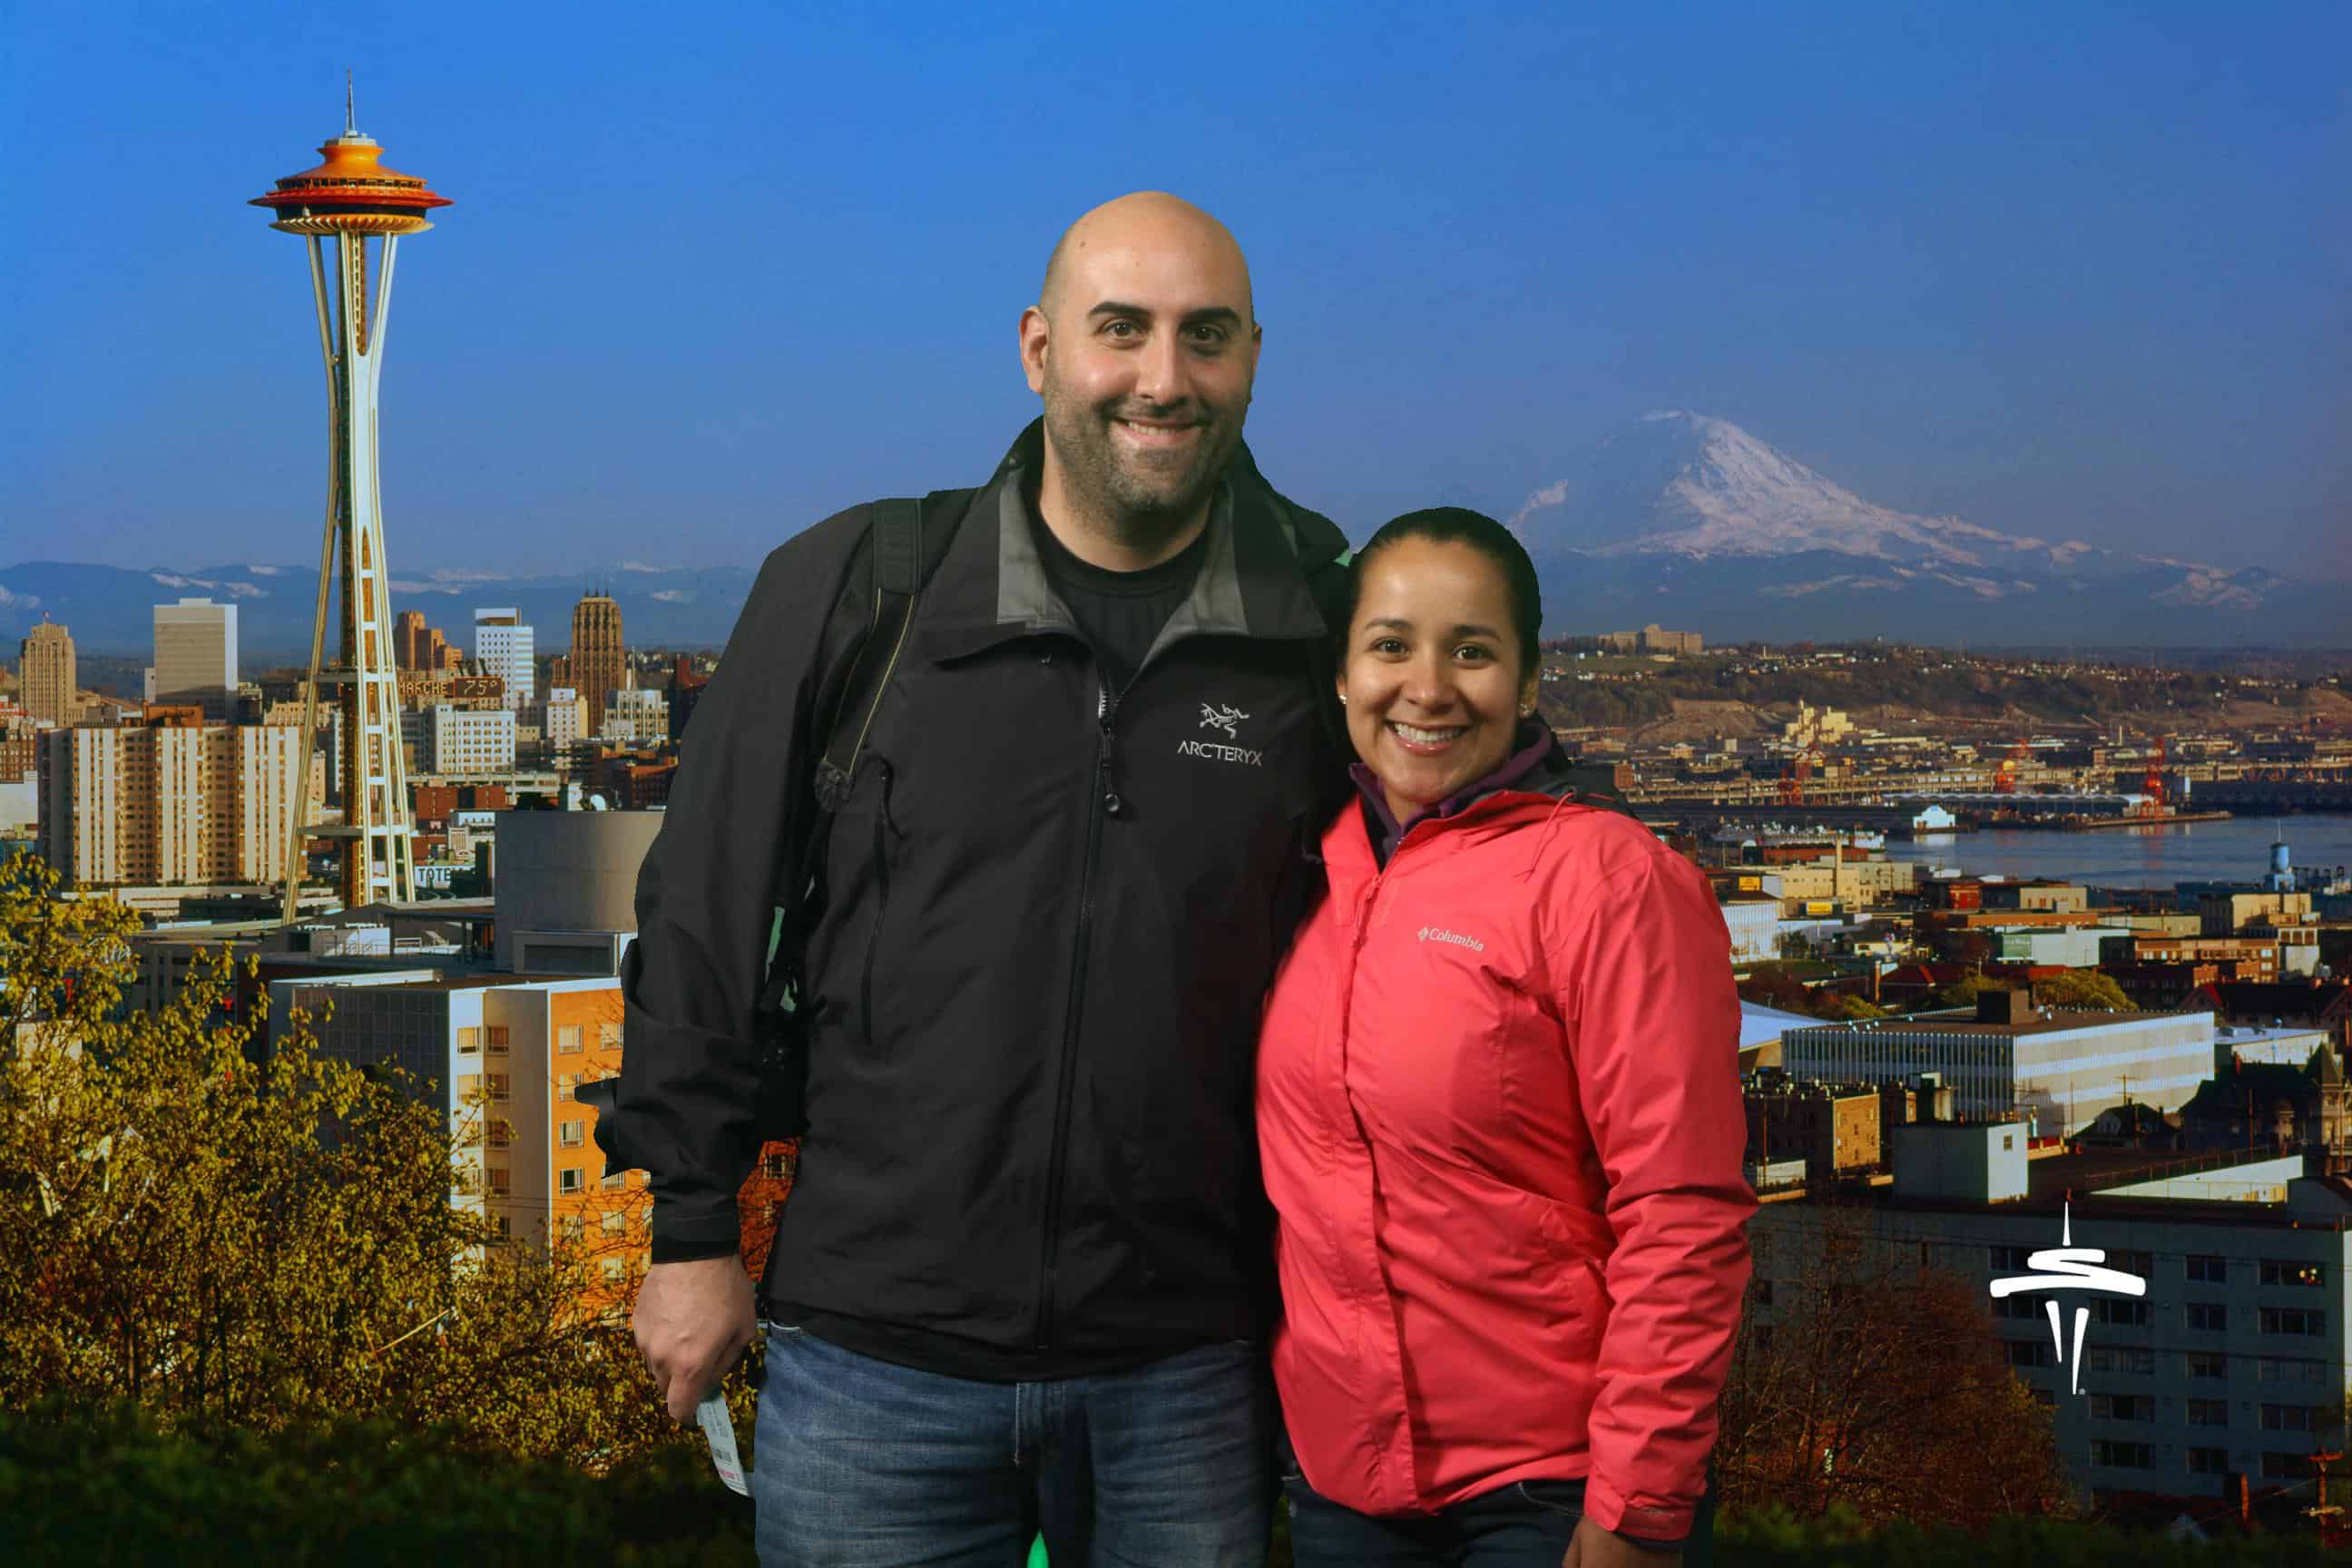 Souvenir photo from the Space Needle in Seattle, Washington